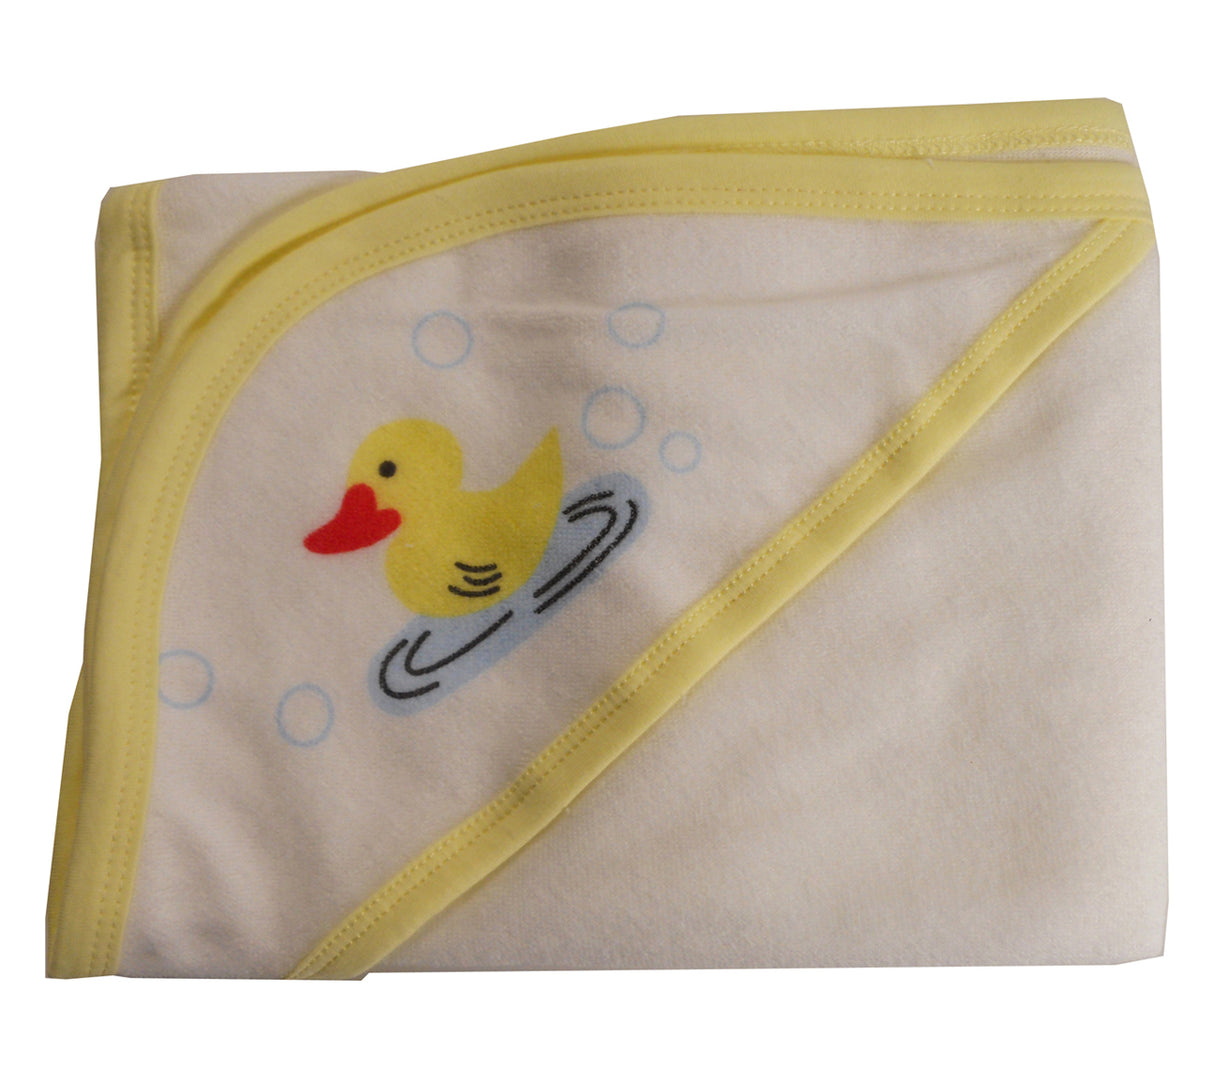 Hooded Towel With Yellow Binding And Screen Prints